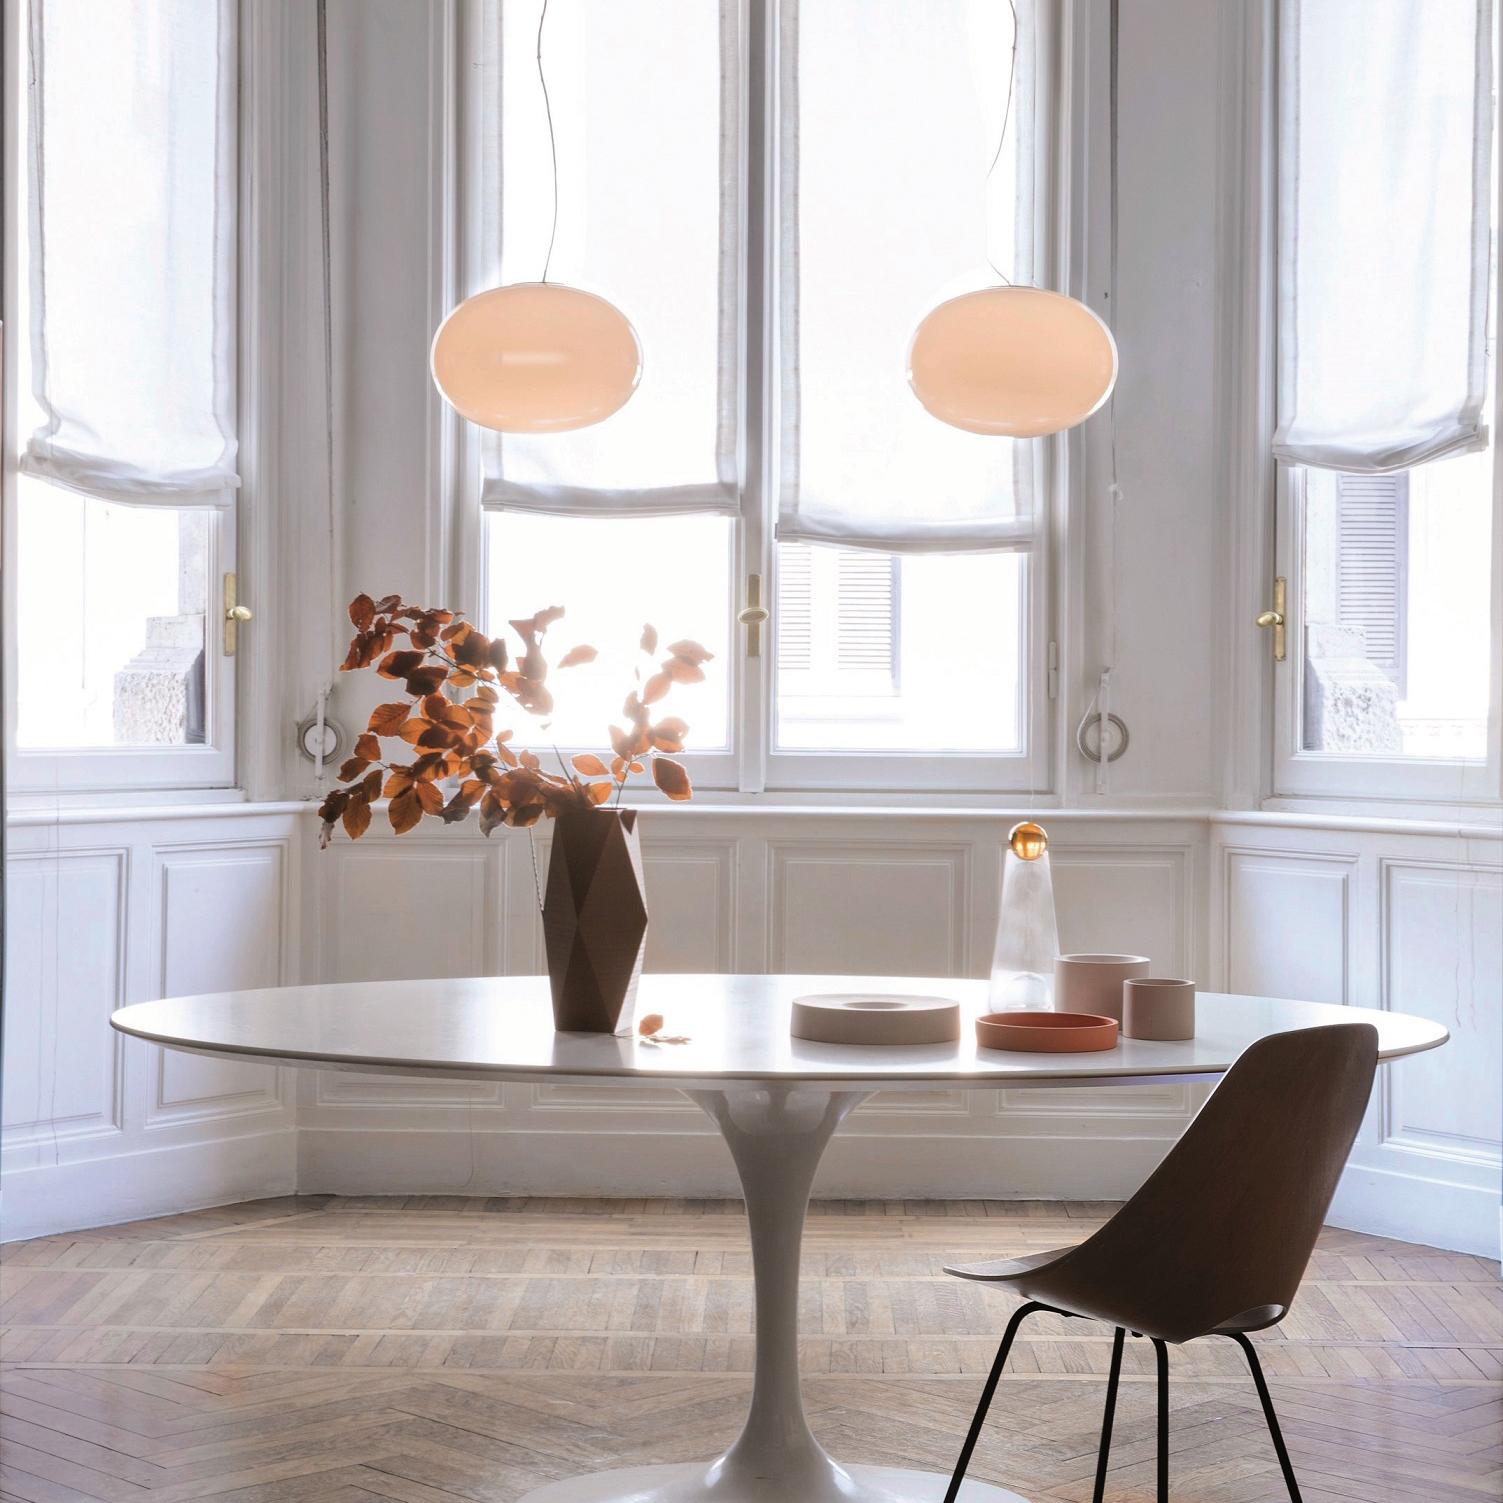 Italian Mariana Pellegrino Soto Suspension Lamp 'Alba' Without Structure by Oluce